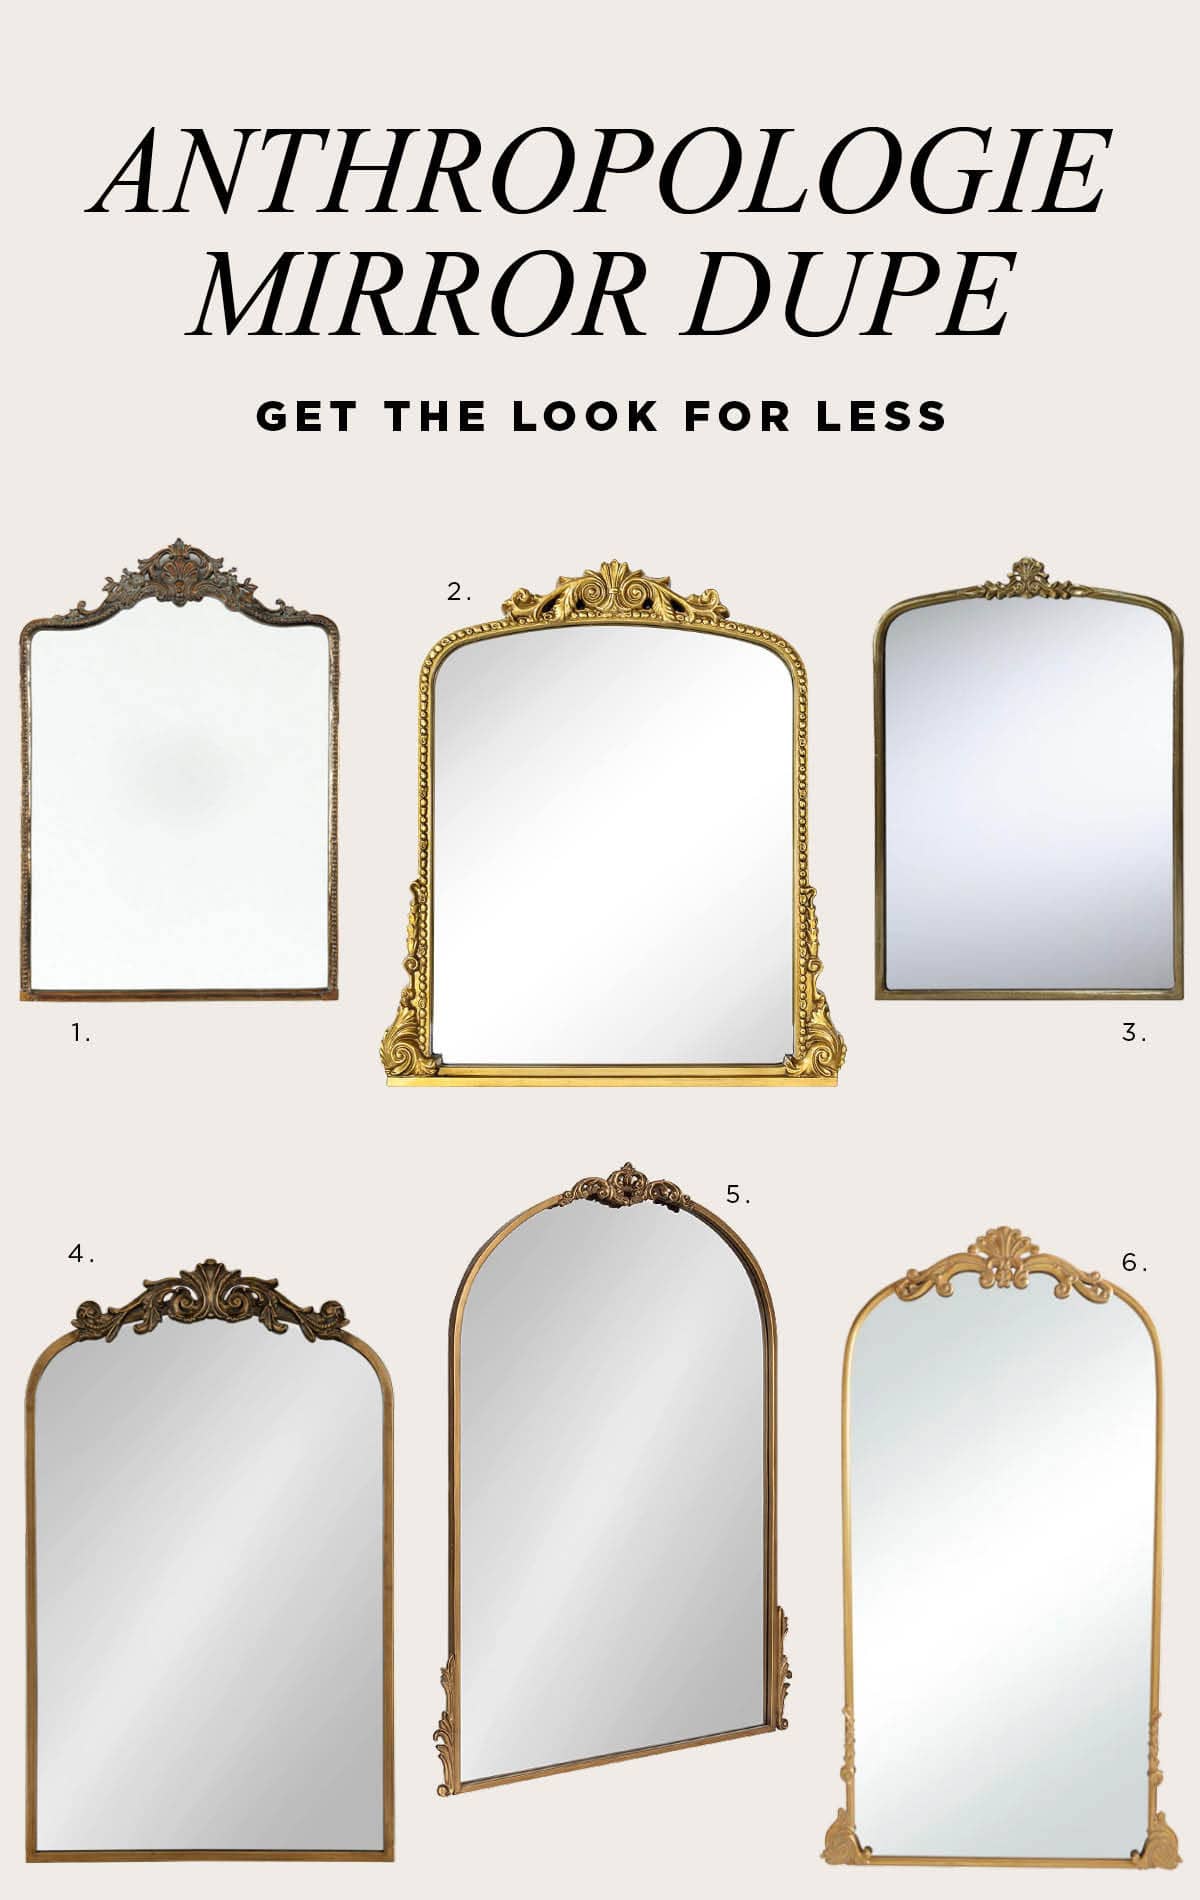 Anthropologie Mirror Dupe (the look for less)